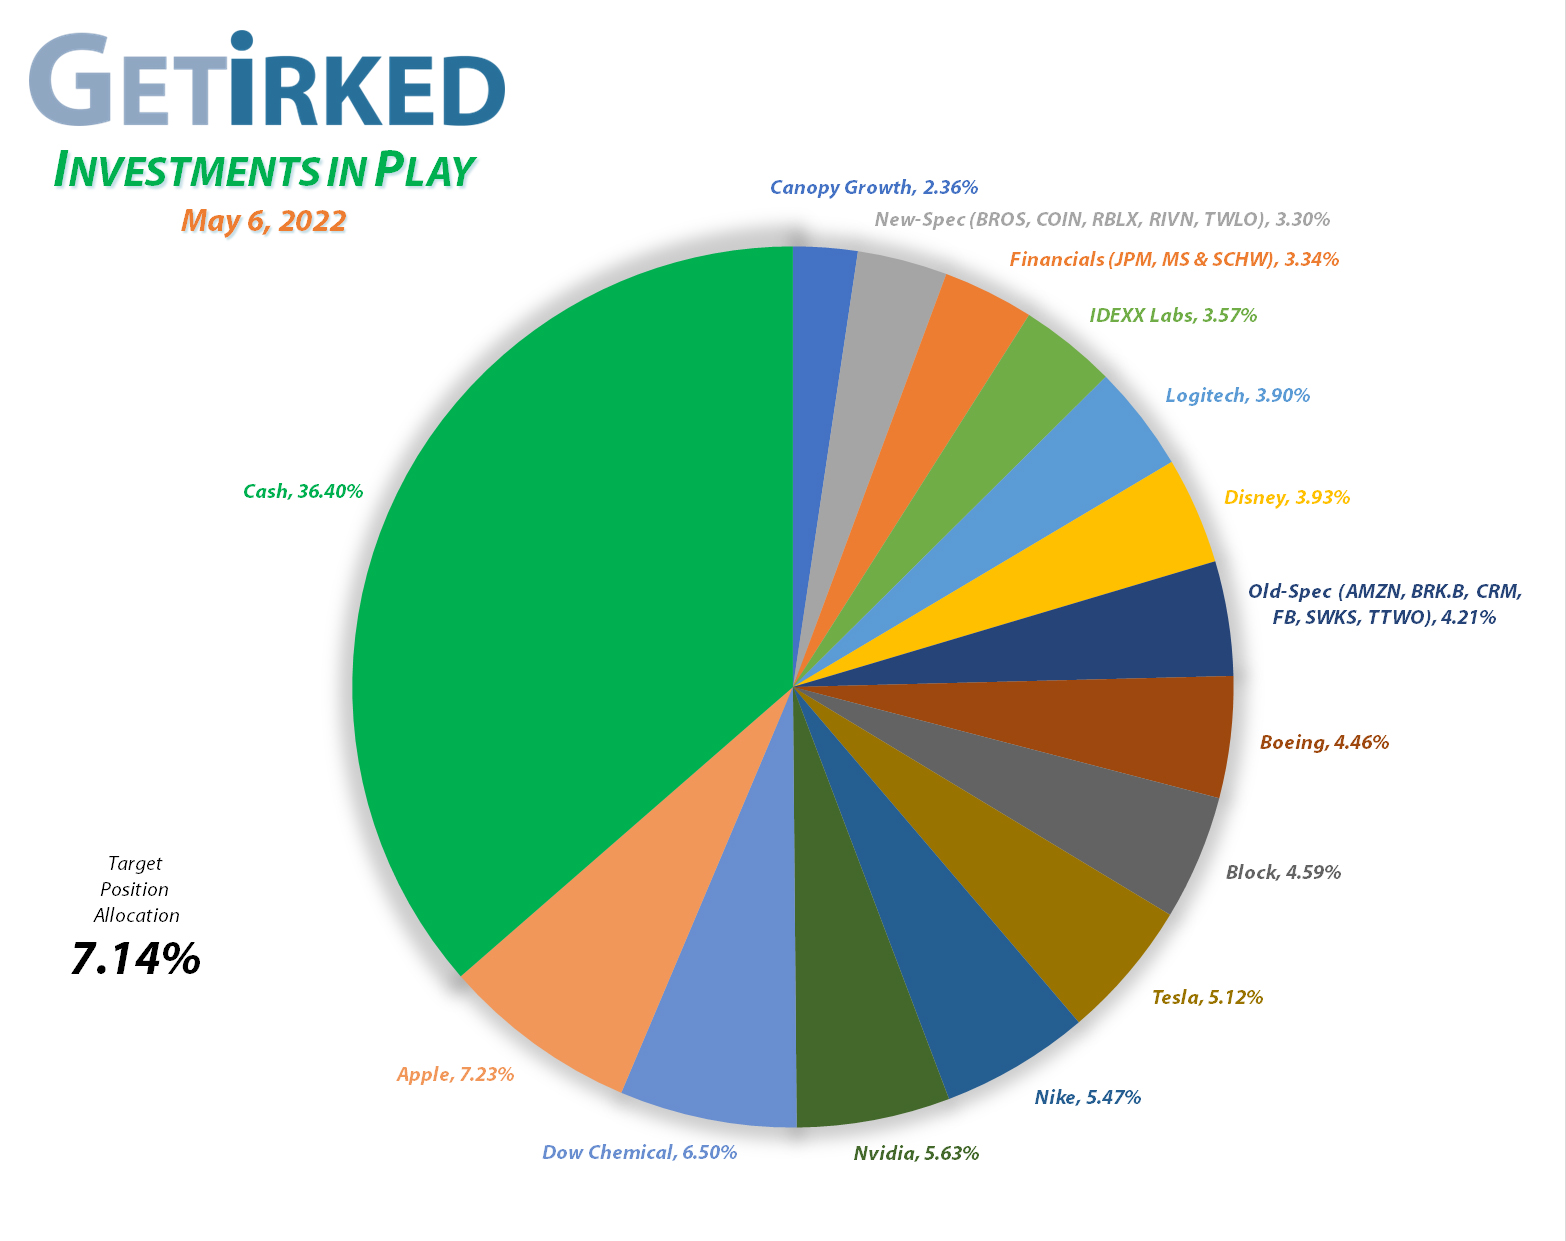 Get Irked - Investments in Play - Current Holdings - March 12, 2021et Irked's Pandemic Portfolio Holdings as of May 6, 2022